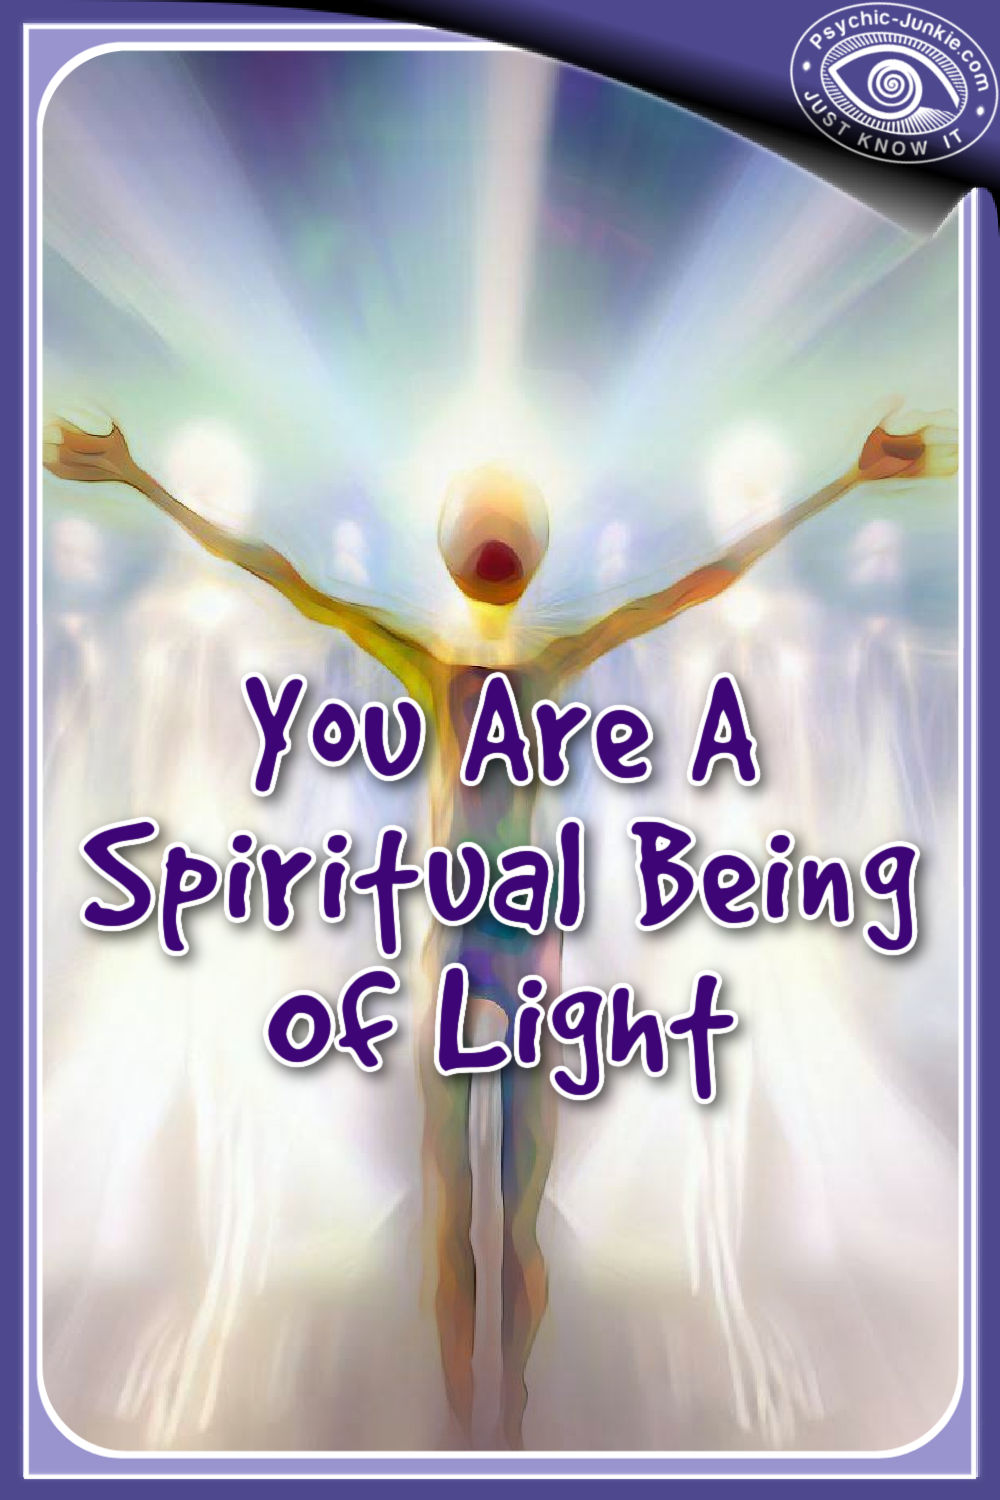 You are a spiritual being of light.